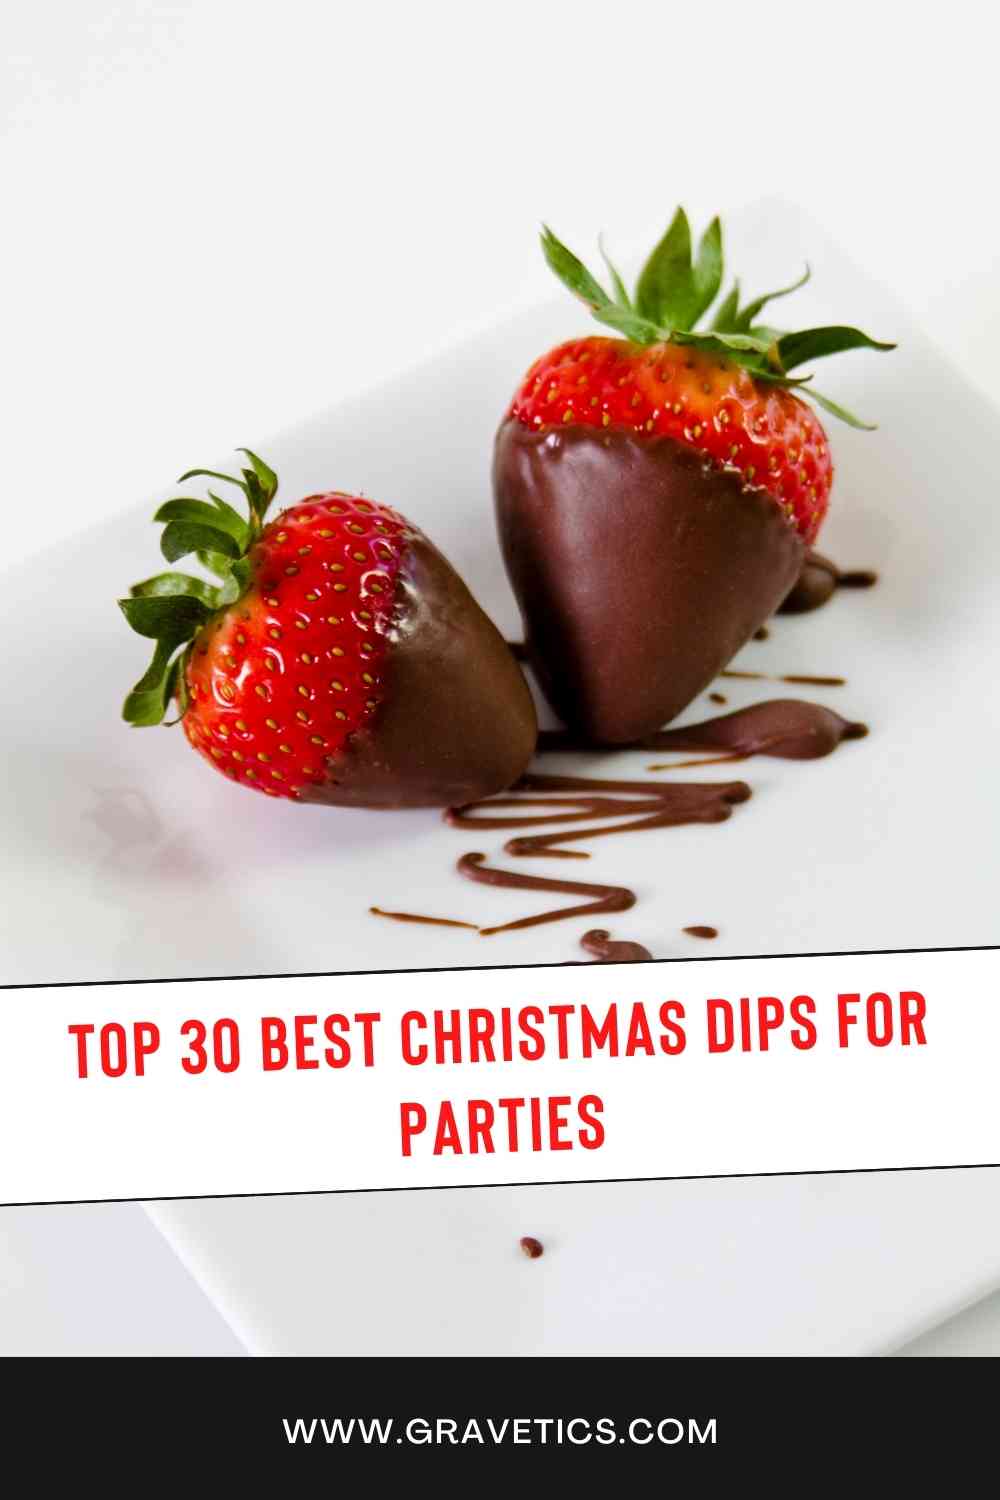 Top 30 Best Christmas Dips For Parties